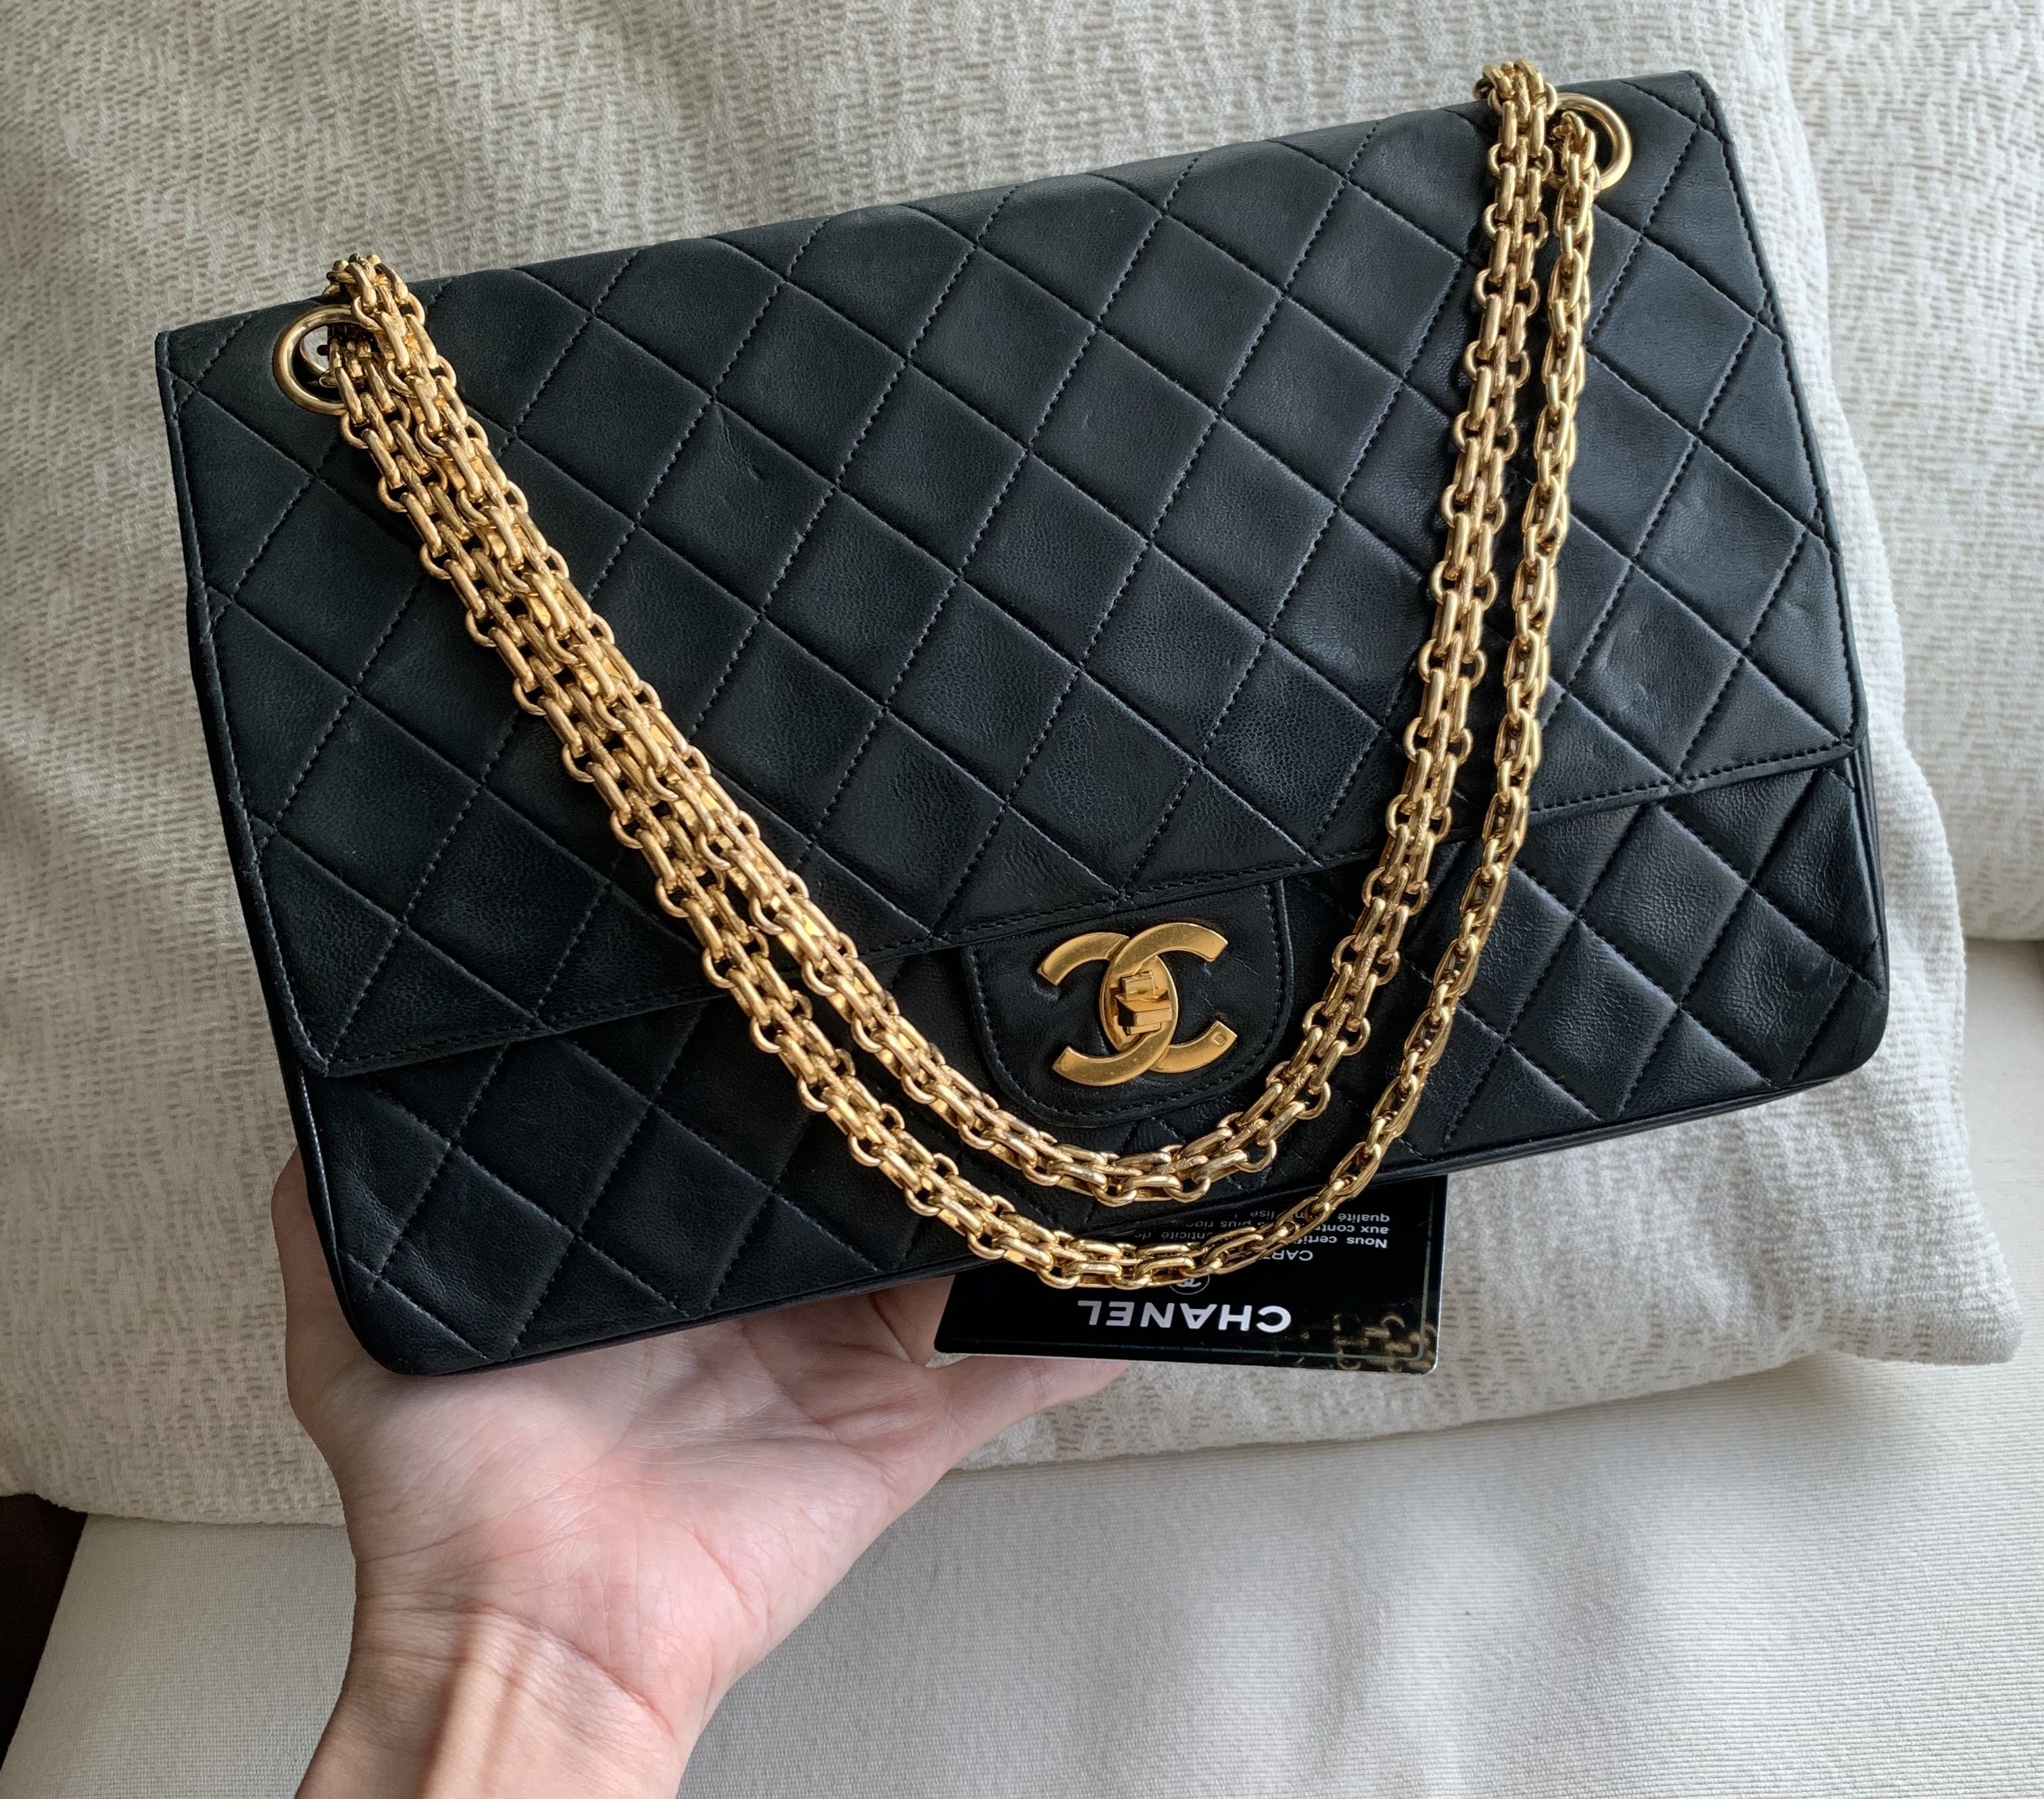 RARE NEW 100% Auth CHANEL Black Ostrich Leather Gold Chain 9.5